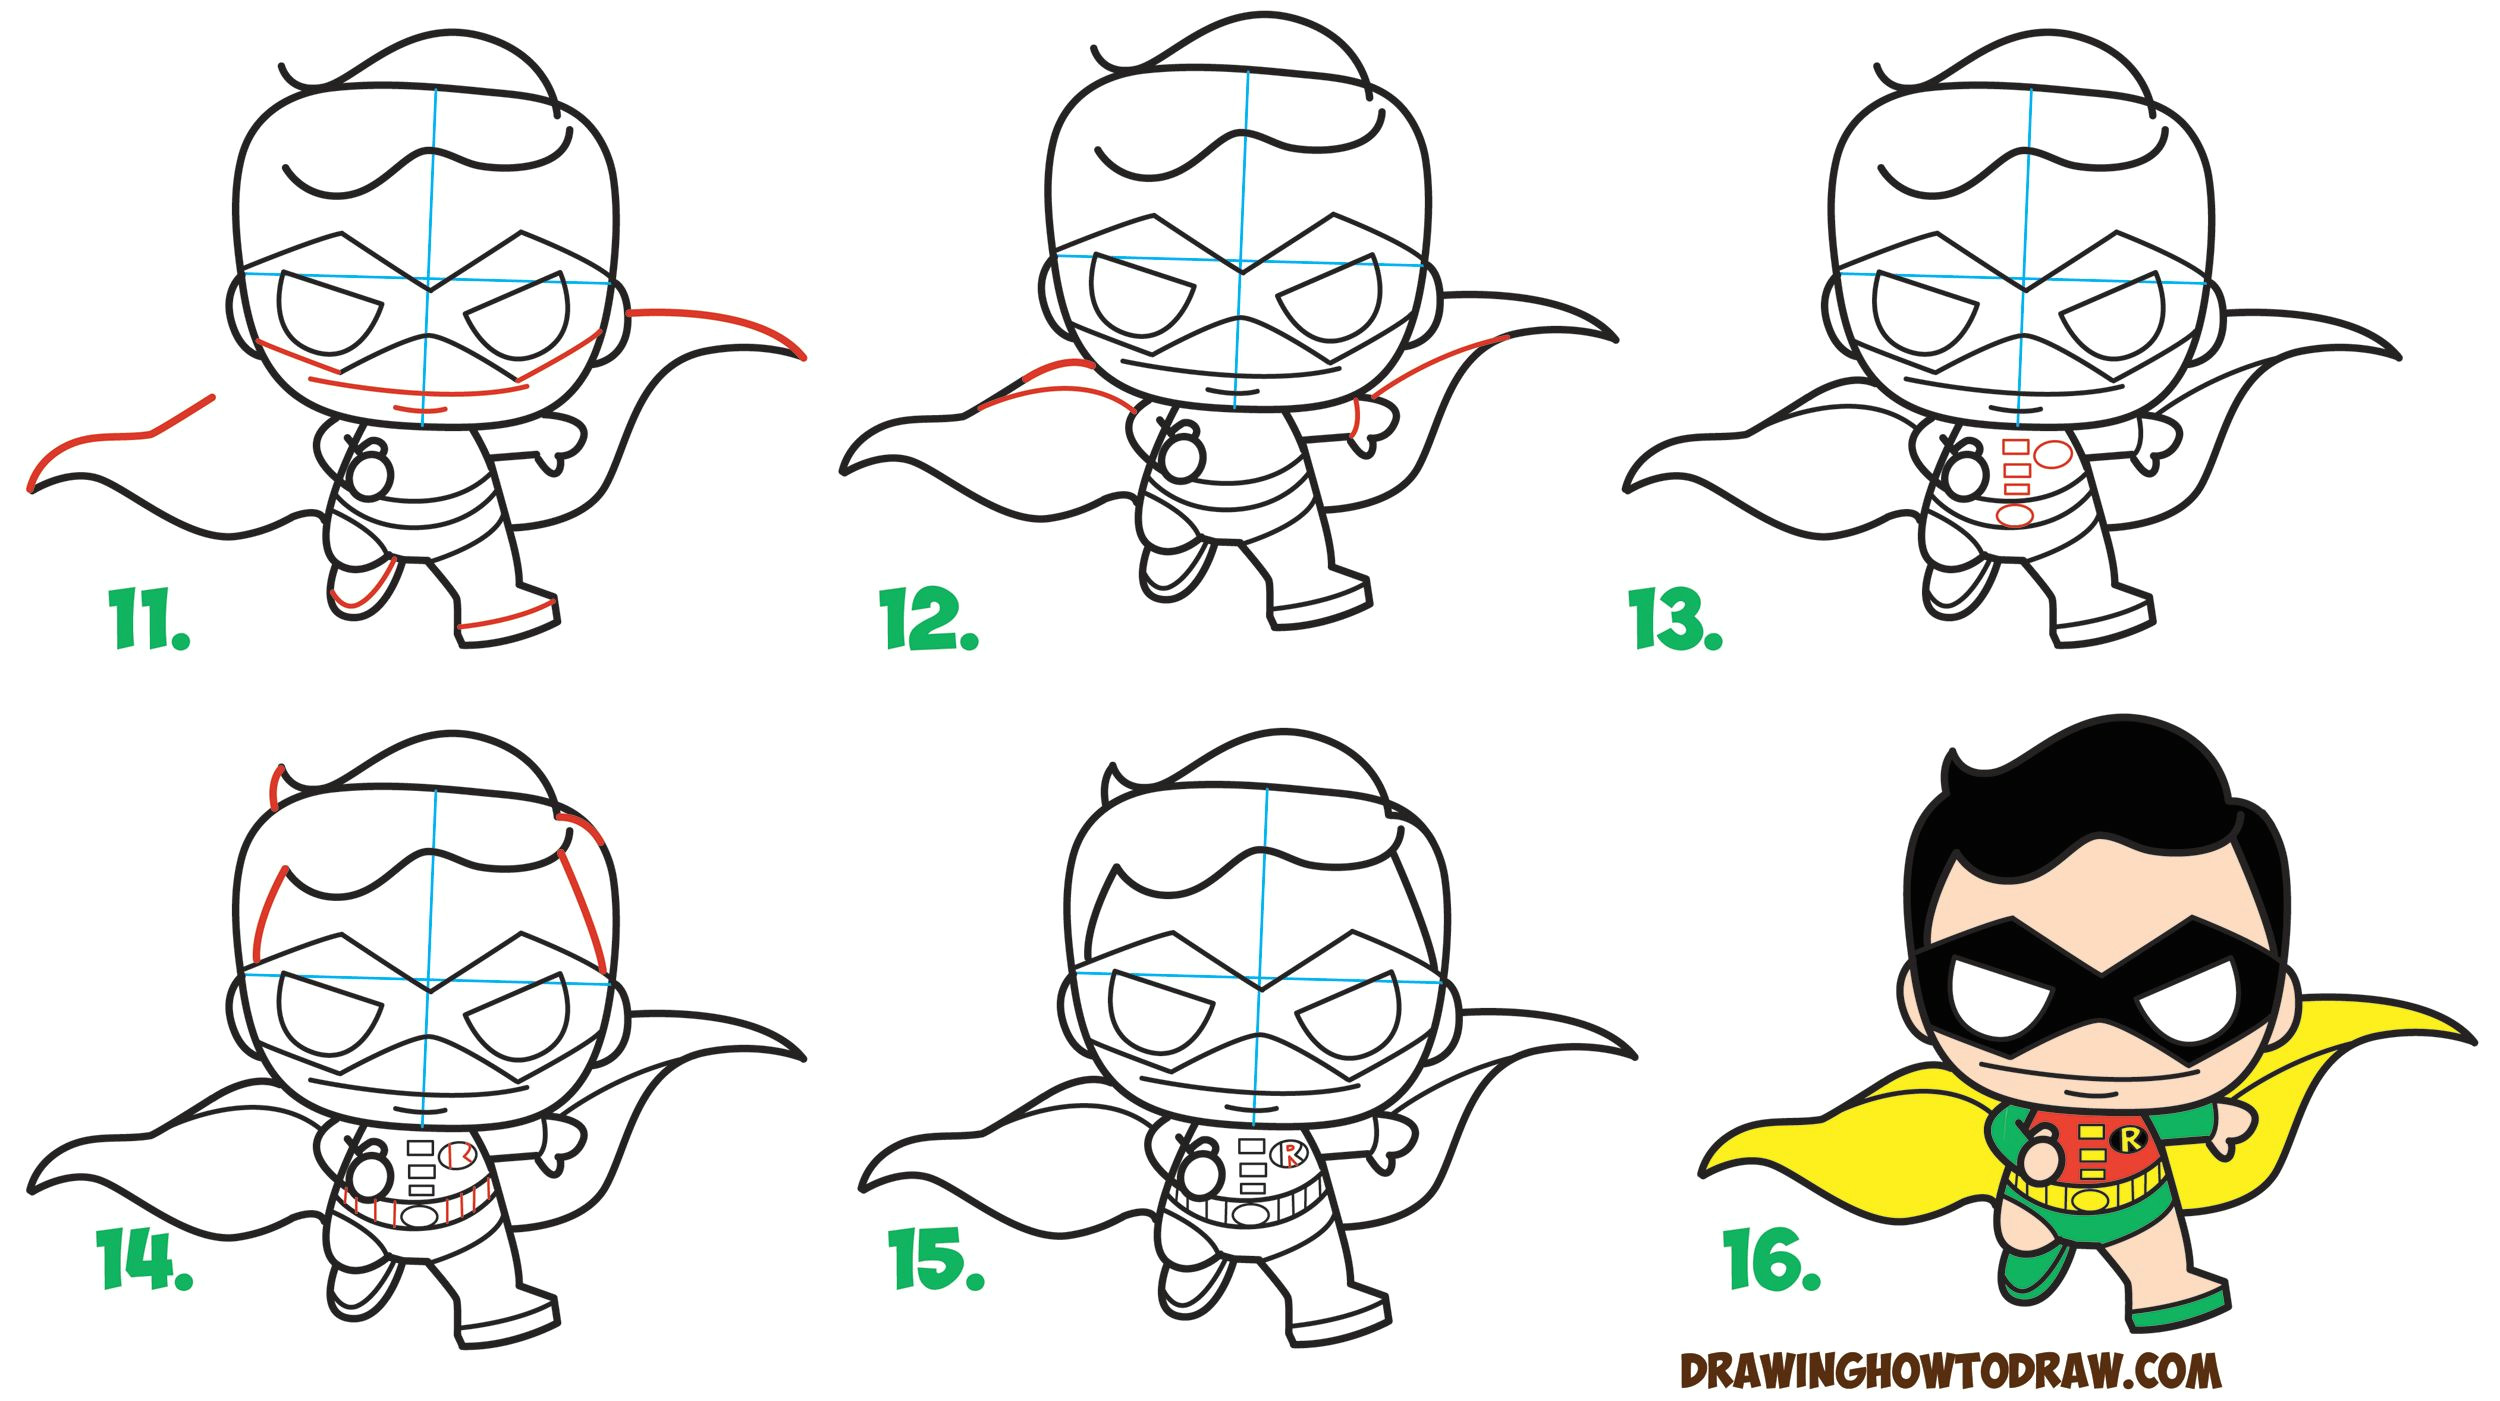 learn how to draw cute kawaii chibi robin from dc comics batman robin in simple step by step drawing tutorial for kids